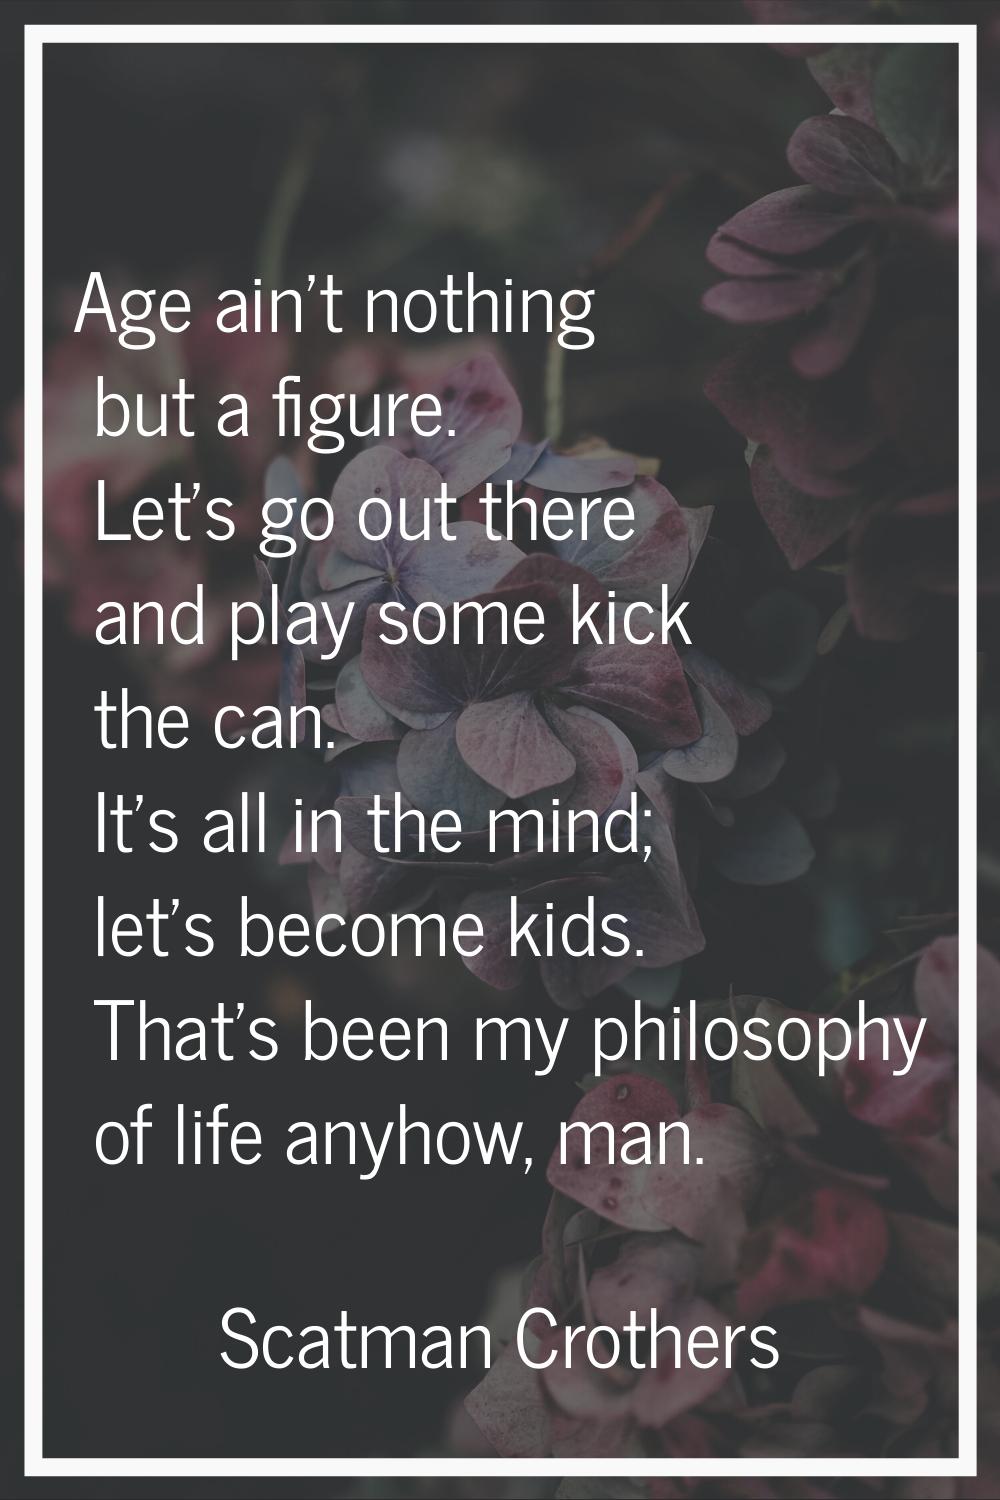 Age ain't nothing but a figure. Let's go out there and play some kick the can. It's all in the mind